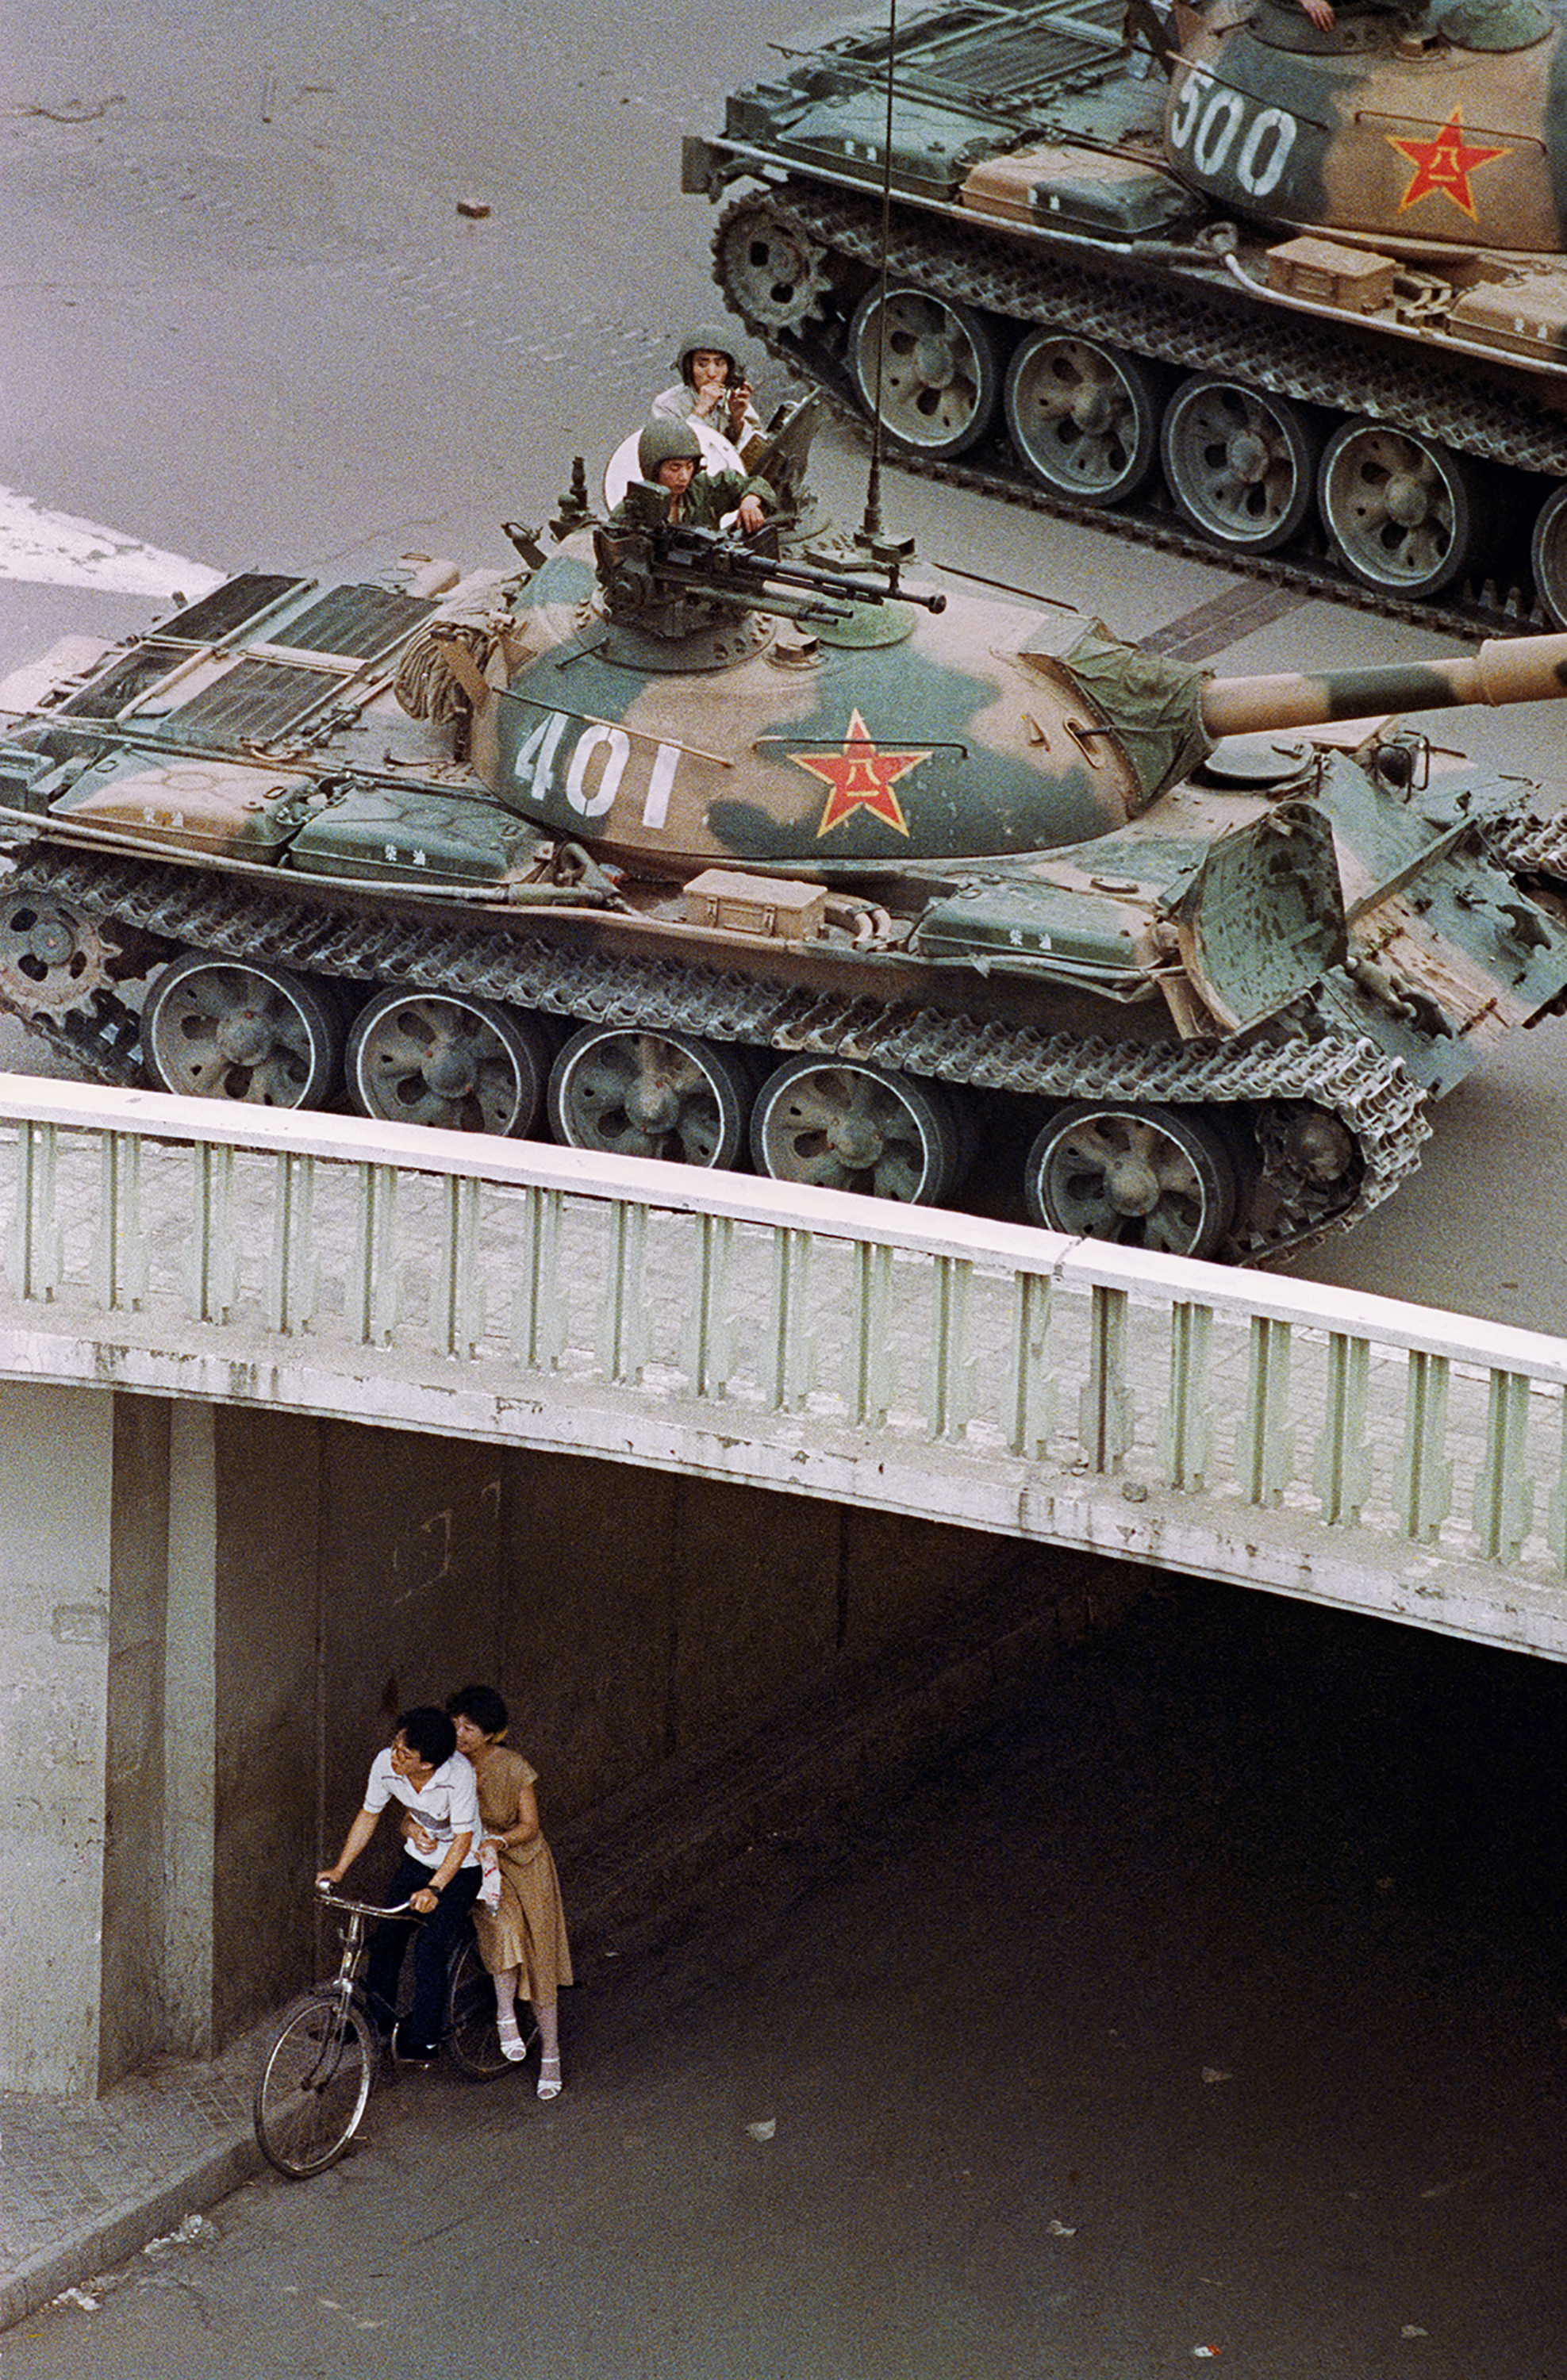 Couple hides from tank at Tiananmen Square protests